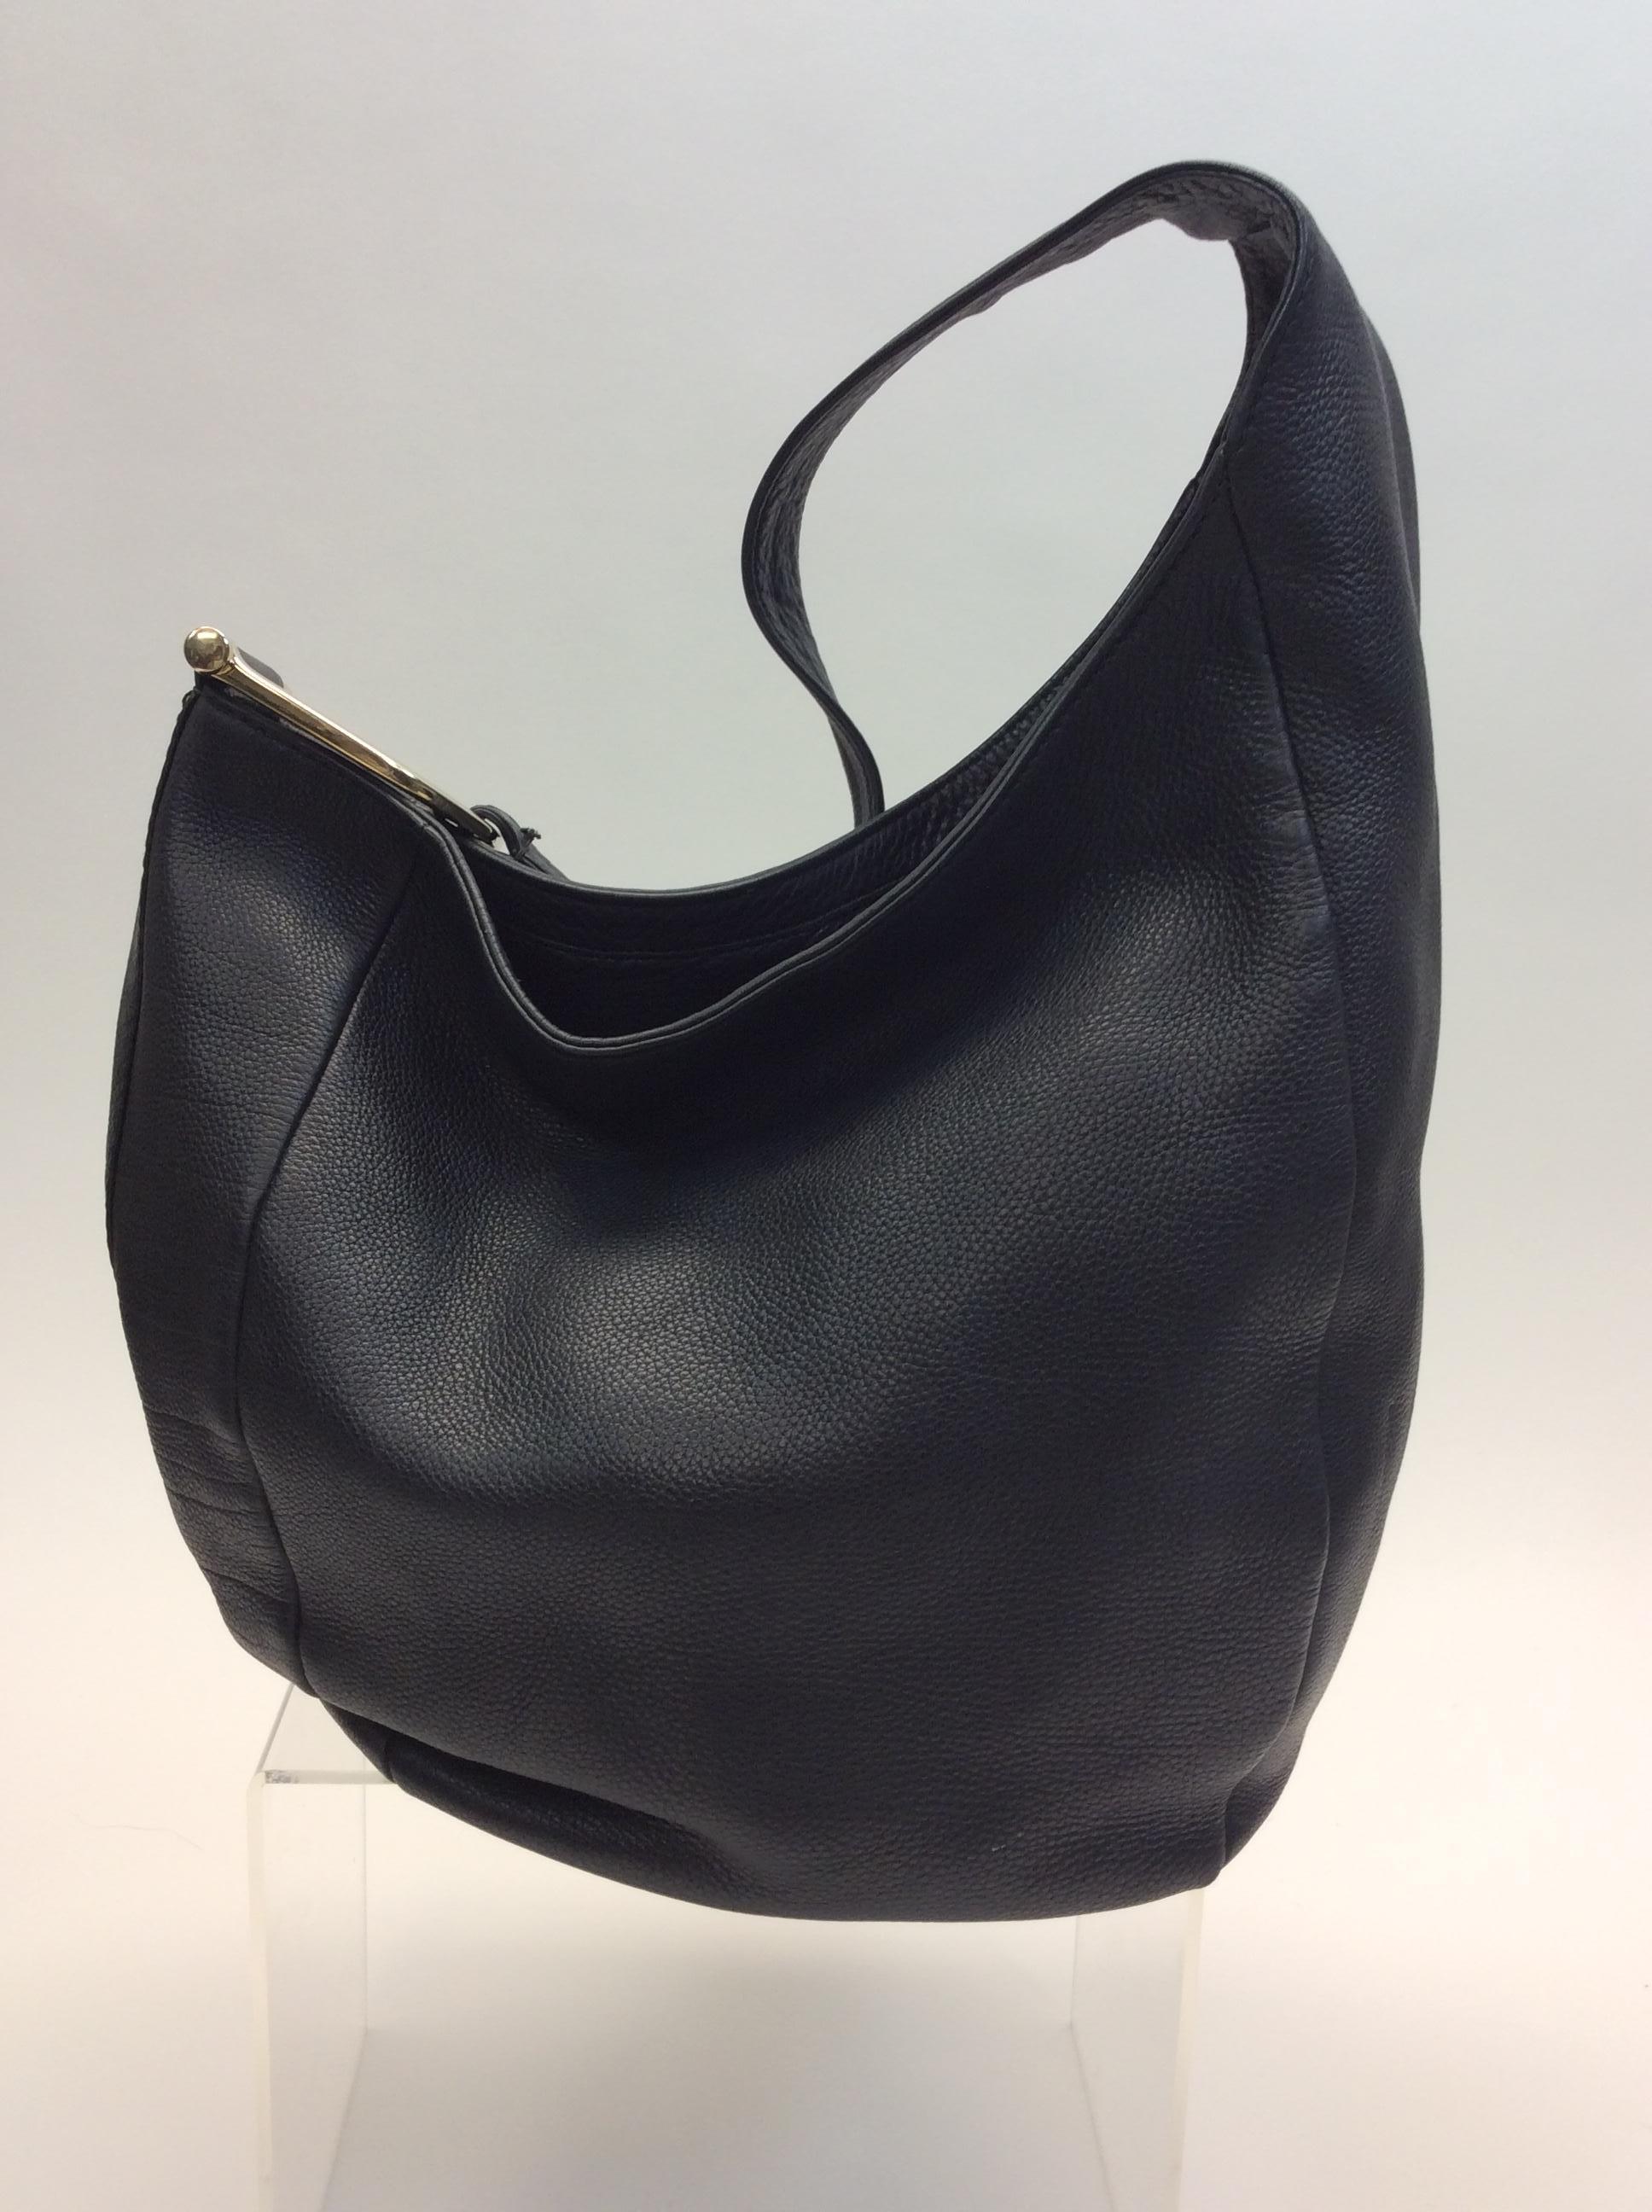 Gucci Black Leather Shoulder Bag with Horsebit Detail In Good Condition For Sale In Narberth, PA